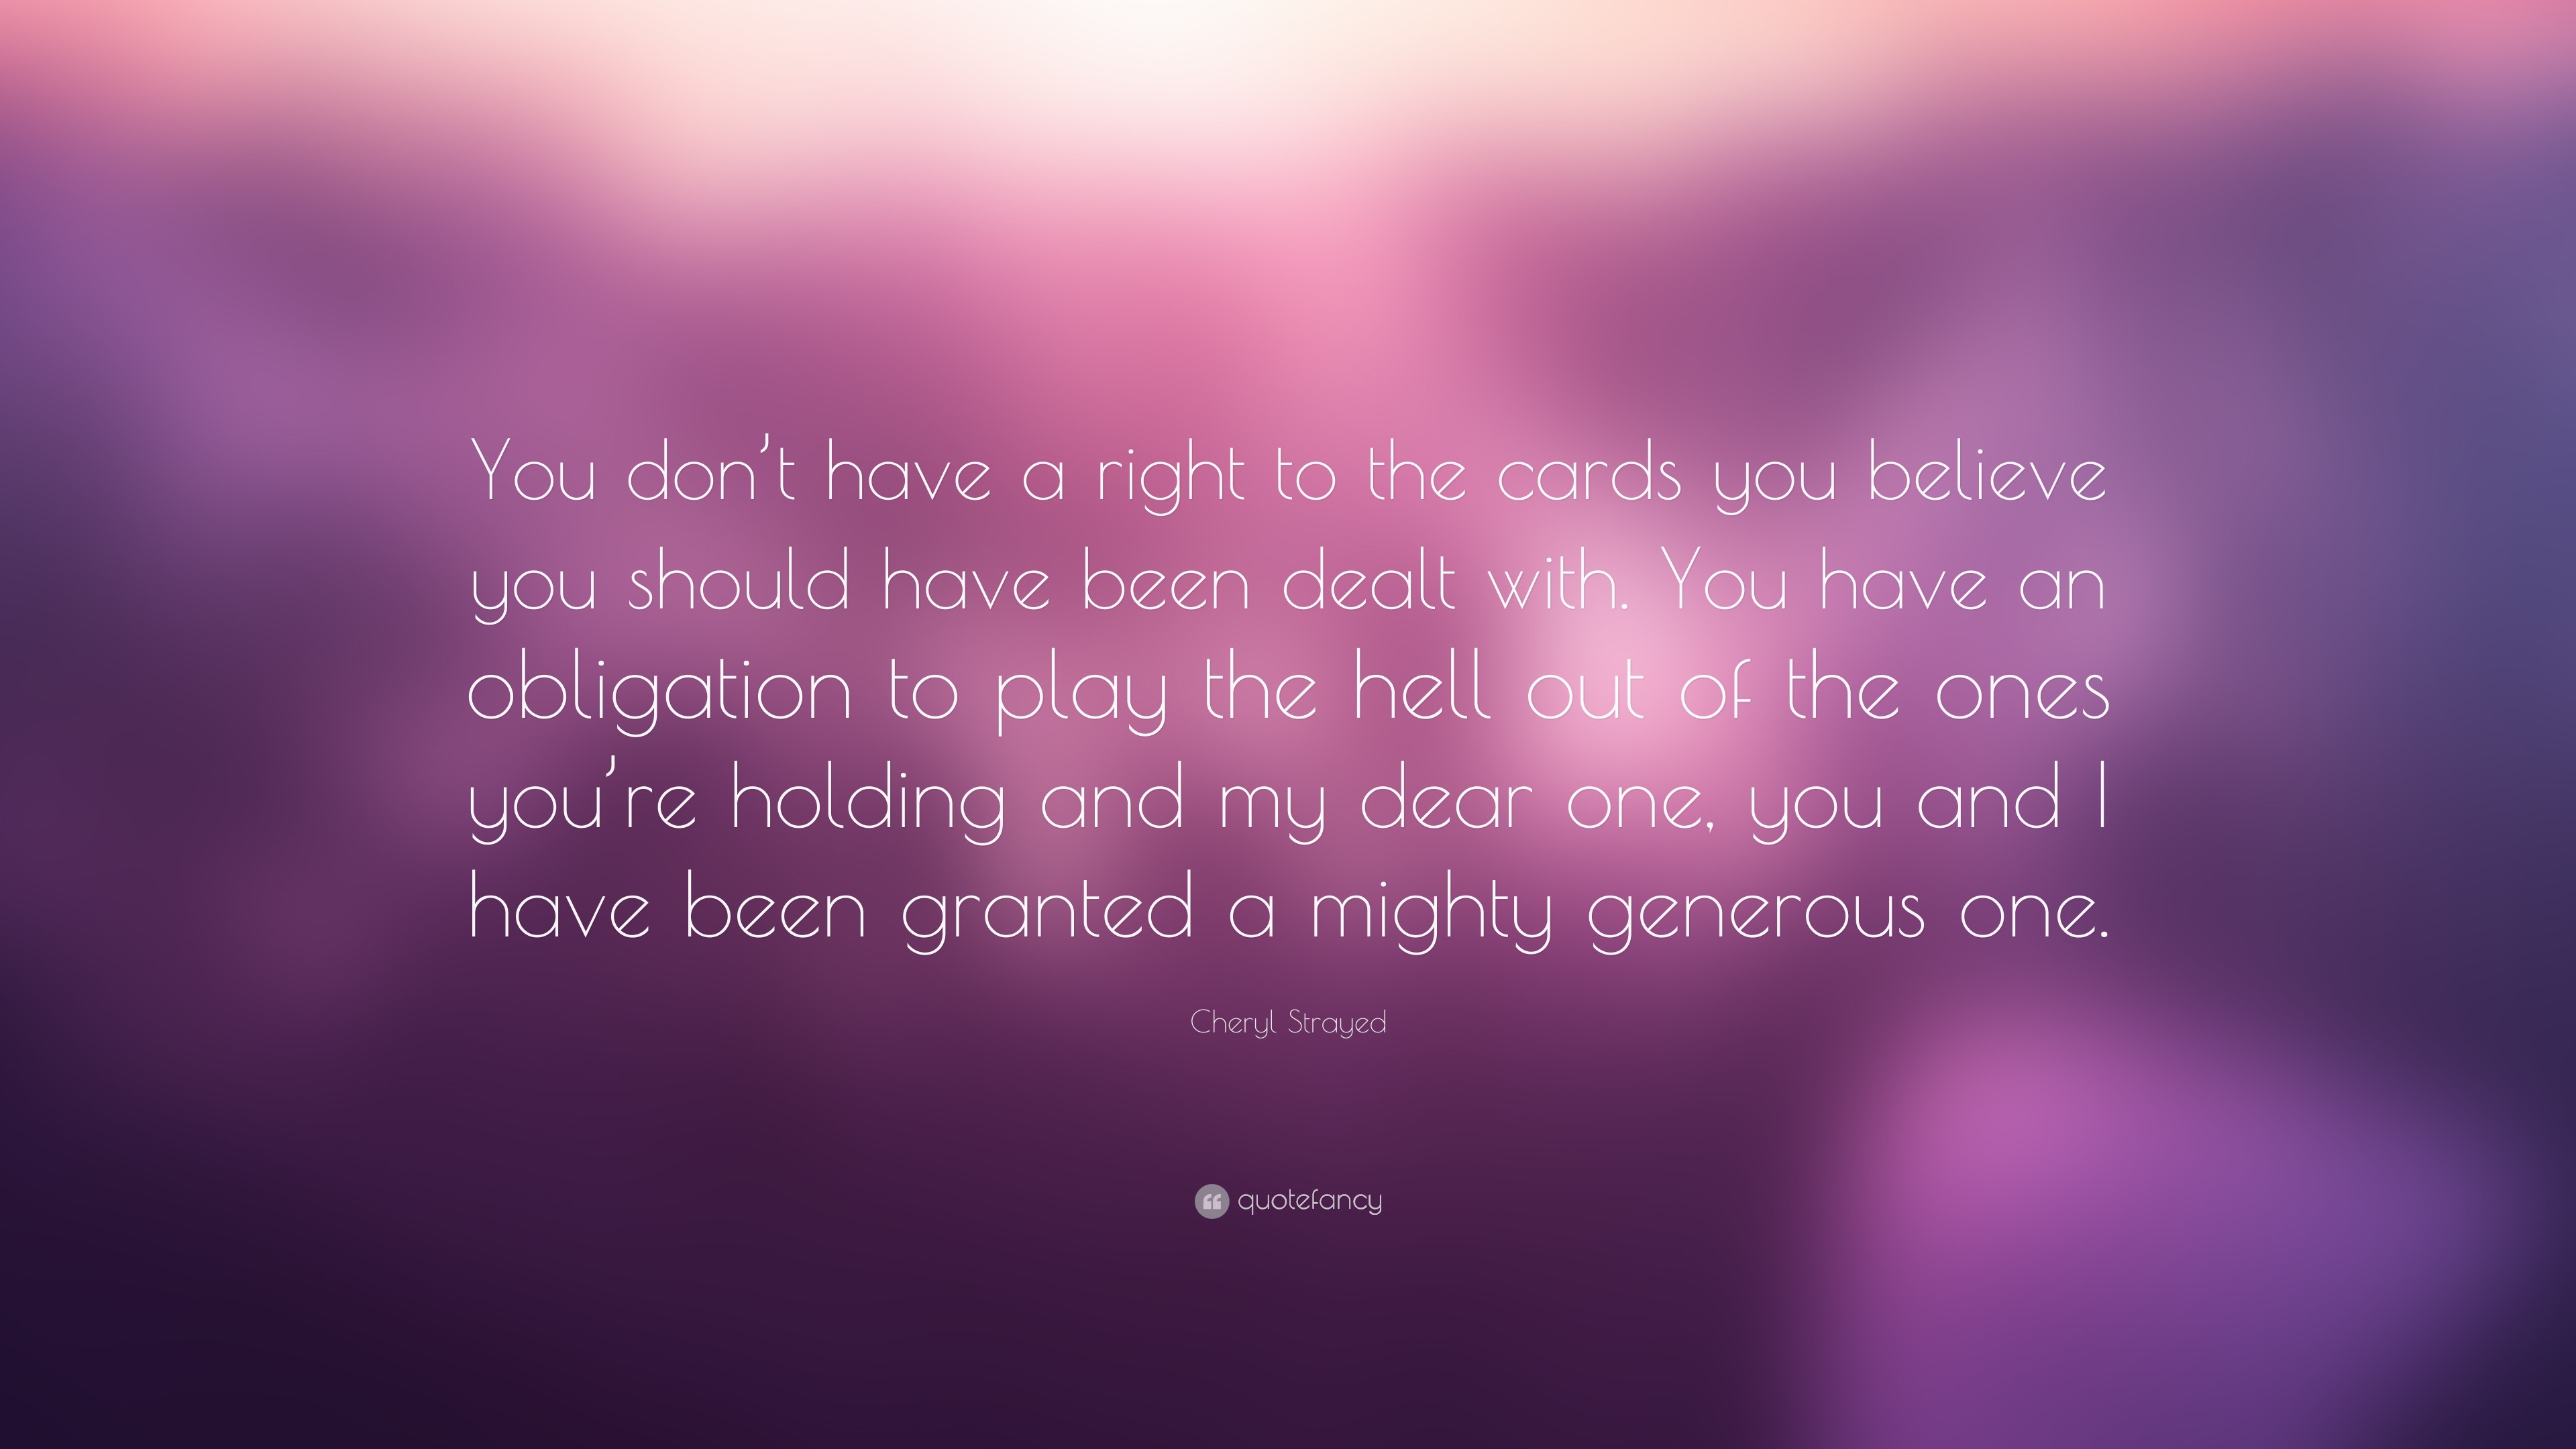 Cheryl Strayed Quote: “You don’t have a right to the cards you believe ...